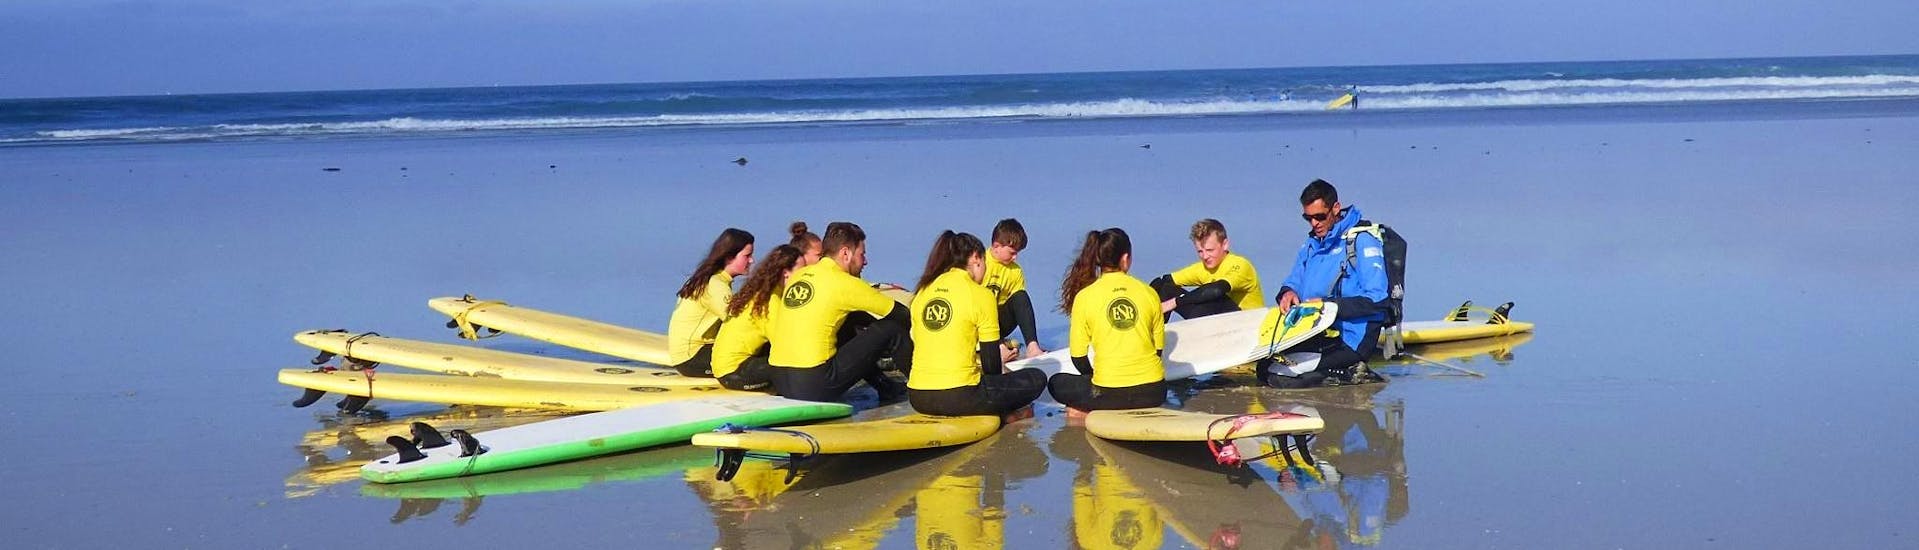 The instructor is giving safety instructions on the beach during the surfing lessons in la pointe de la torche for all levels with ESB la torche.